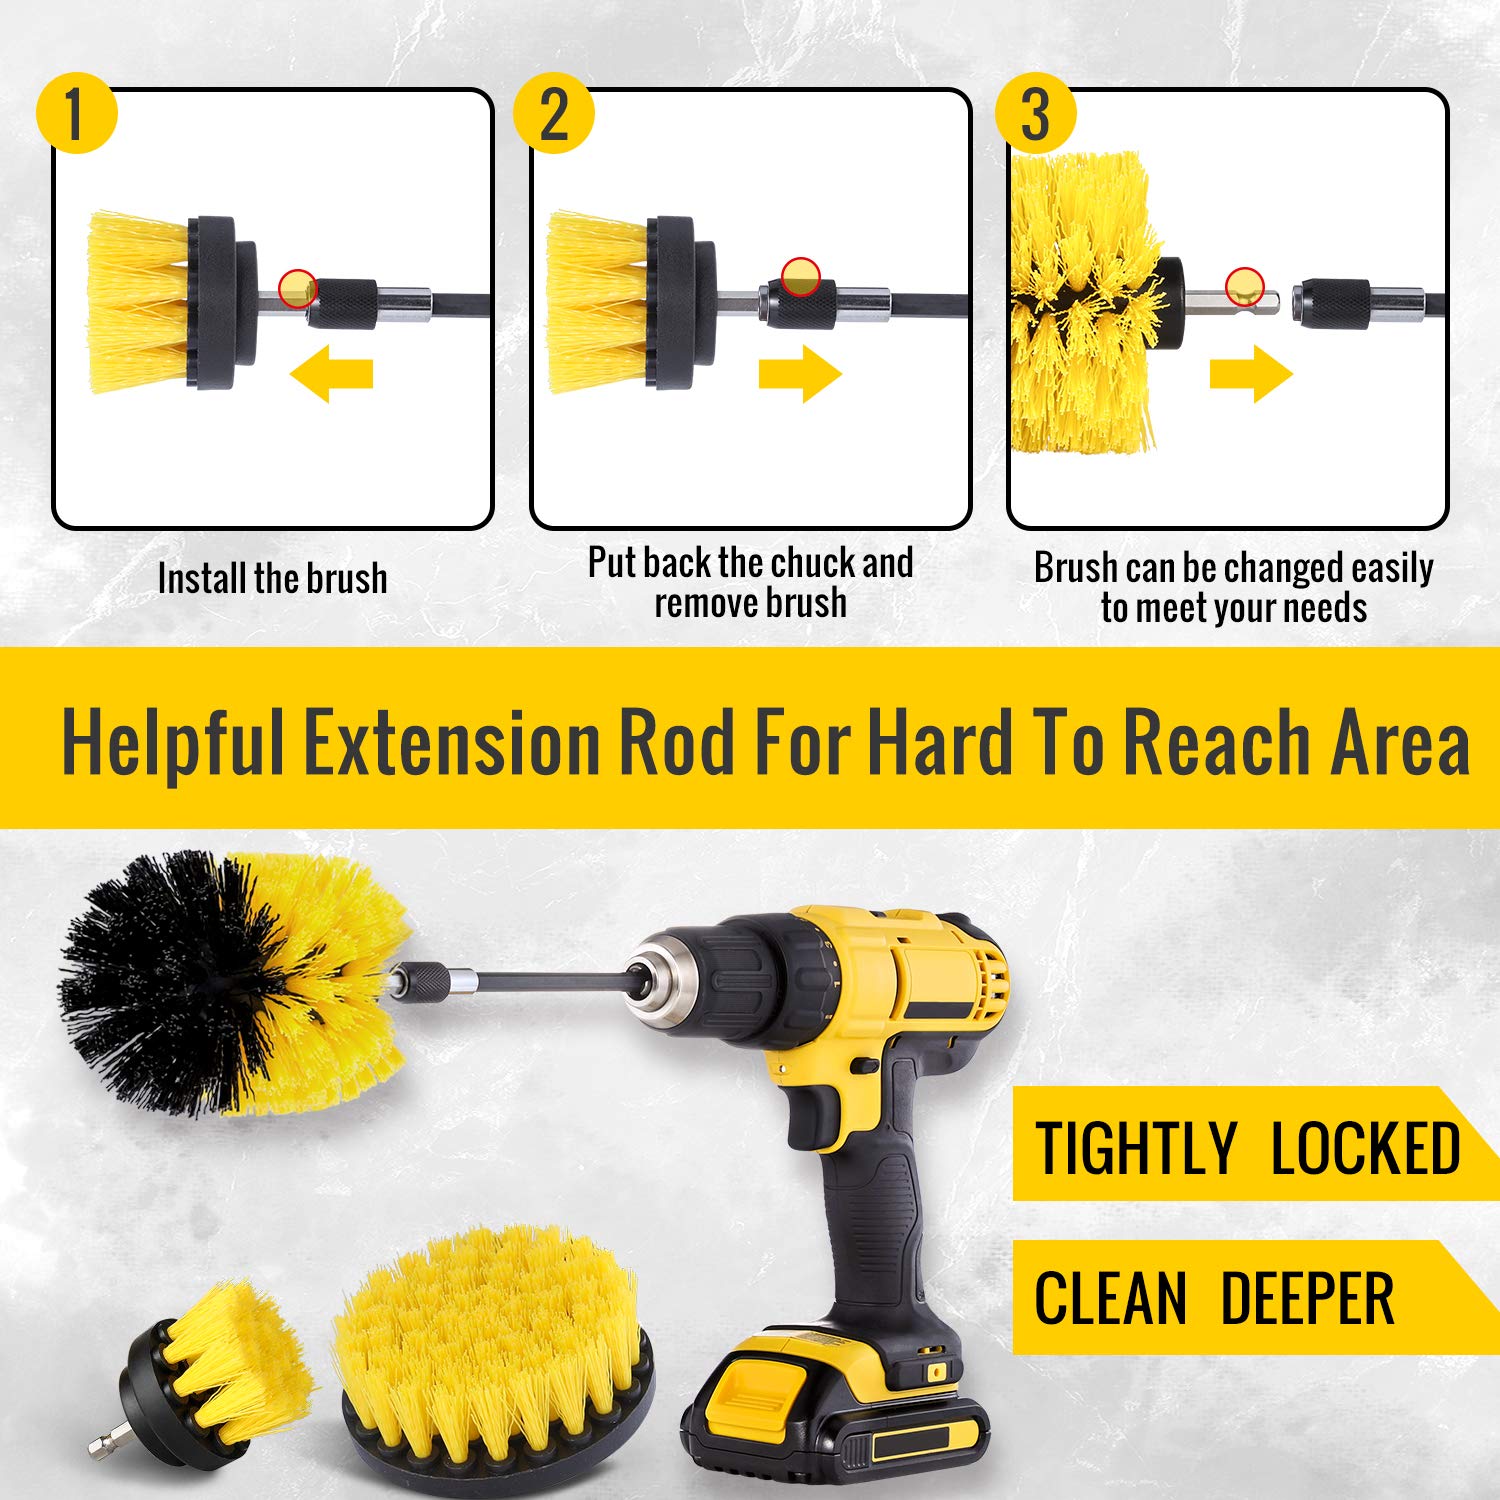 Hiware 4 Pcs Drill Brush Attachment Set - Power Scrubber Brush Cleaning Kit - All Purpose Drill Brush with Extend Attachment for Bathroom Surfaces, Grout, Floor, Tub, Shower, Tile, Kitchen and Car